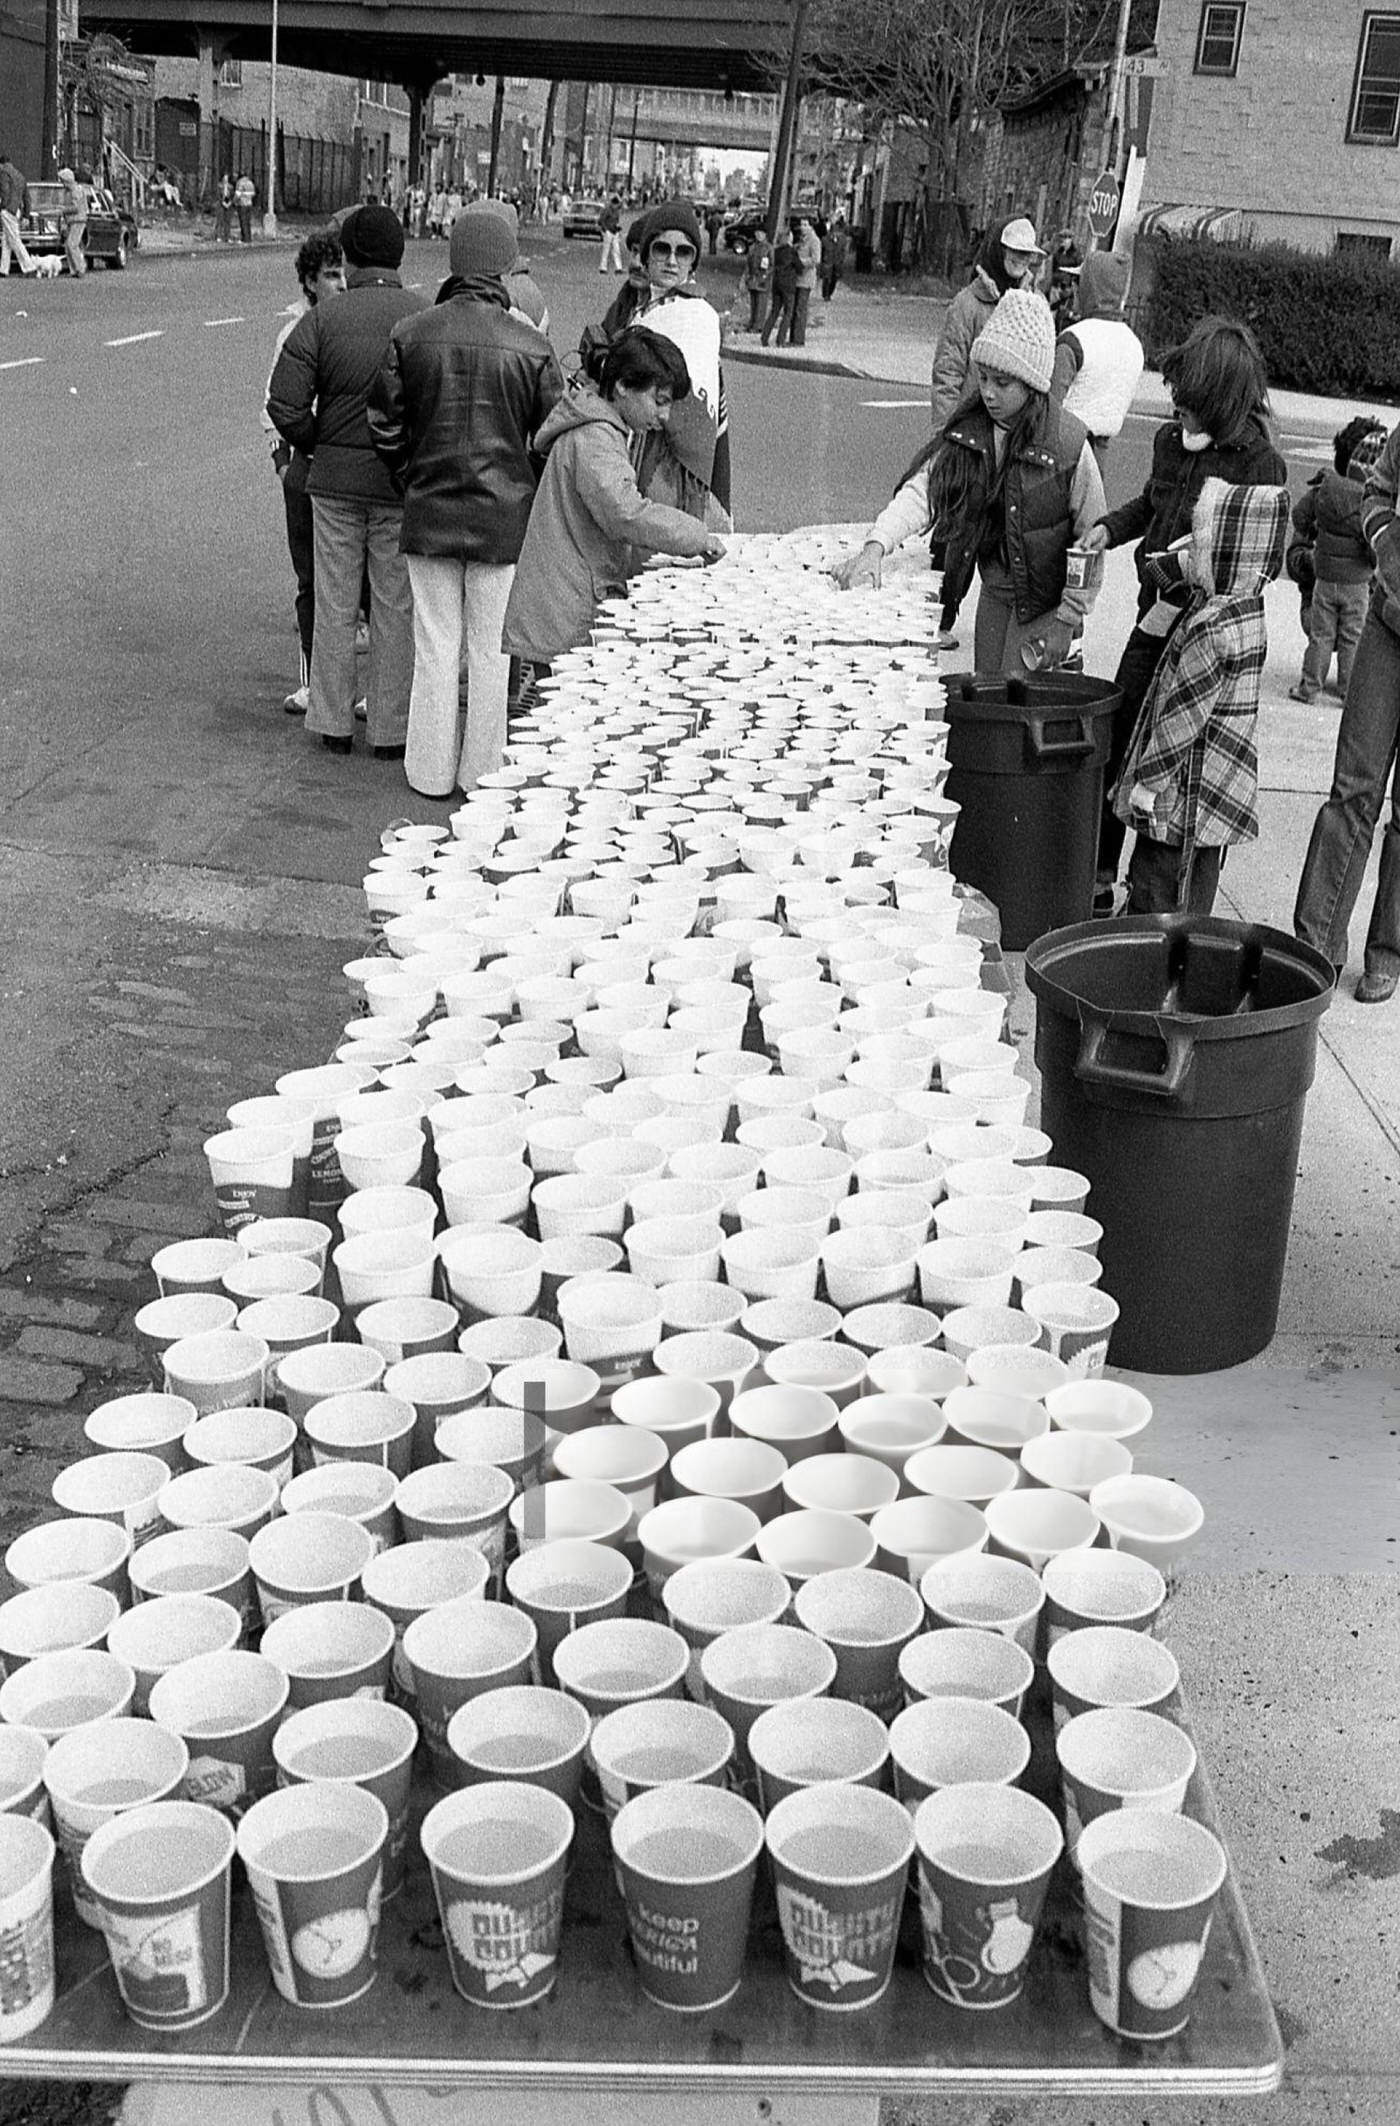 Volunteers At A Water Station Place Filled Cups On Folding Tables At The 14-Mile Marker On Crescent Street During The New York City Marathon, Queens, 1980.